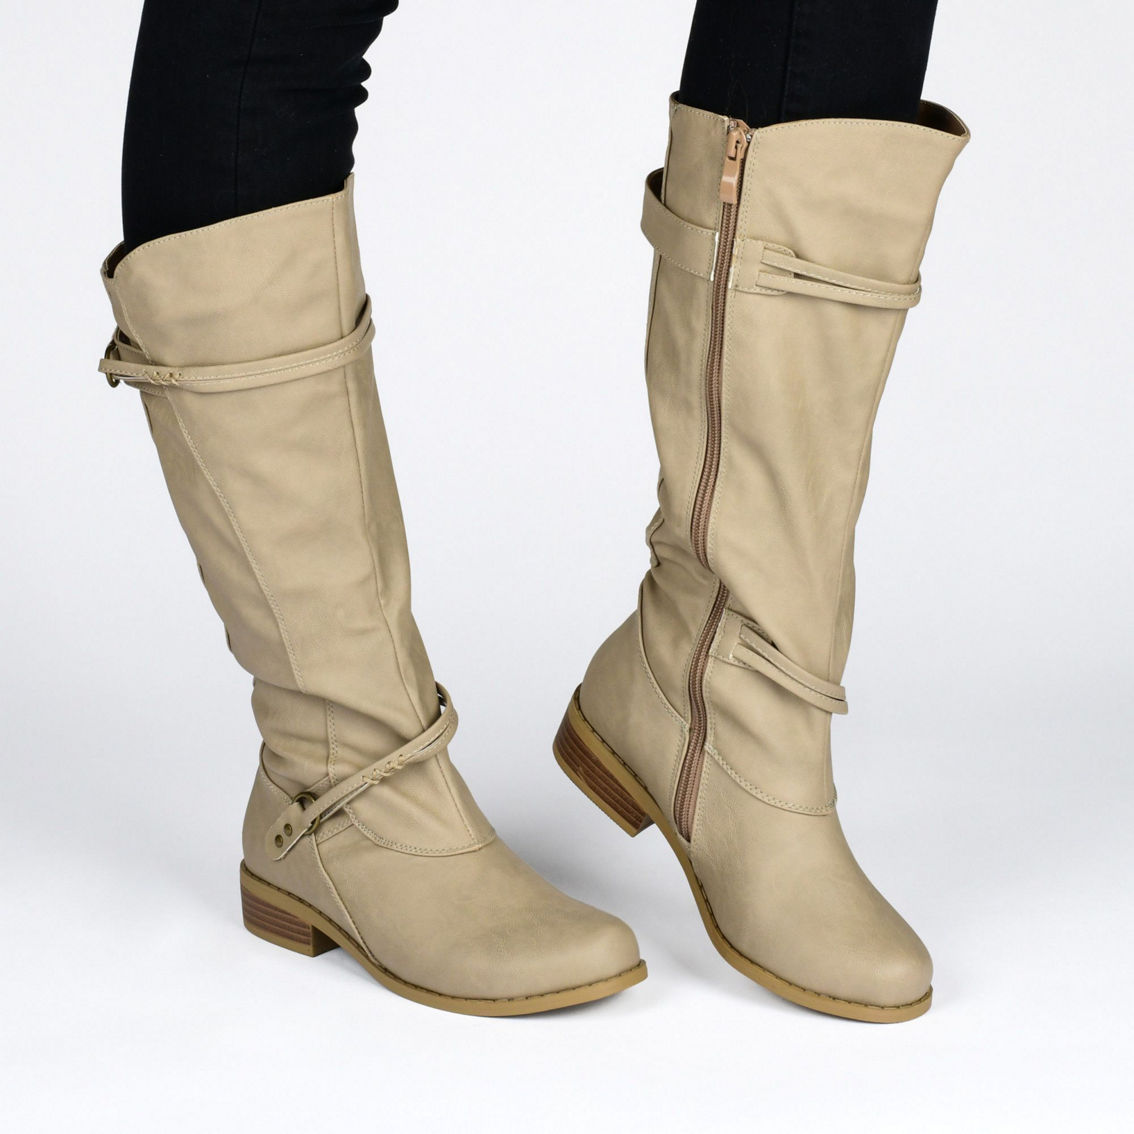 Journee Collection Women's Harley Boot - Image 5 of 5